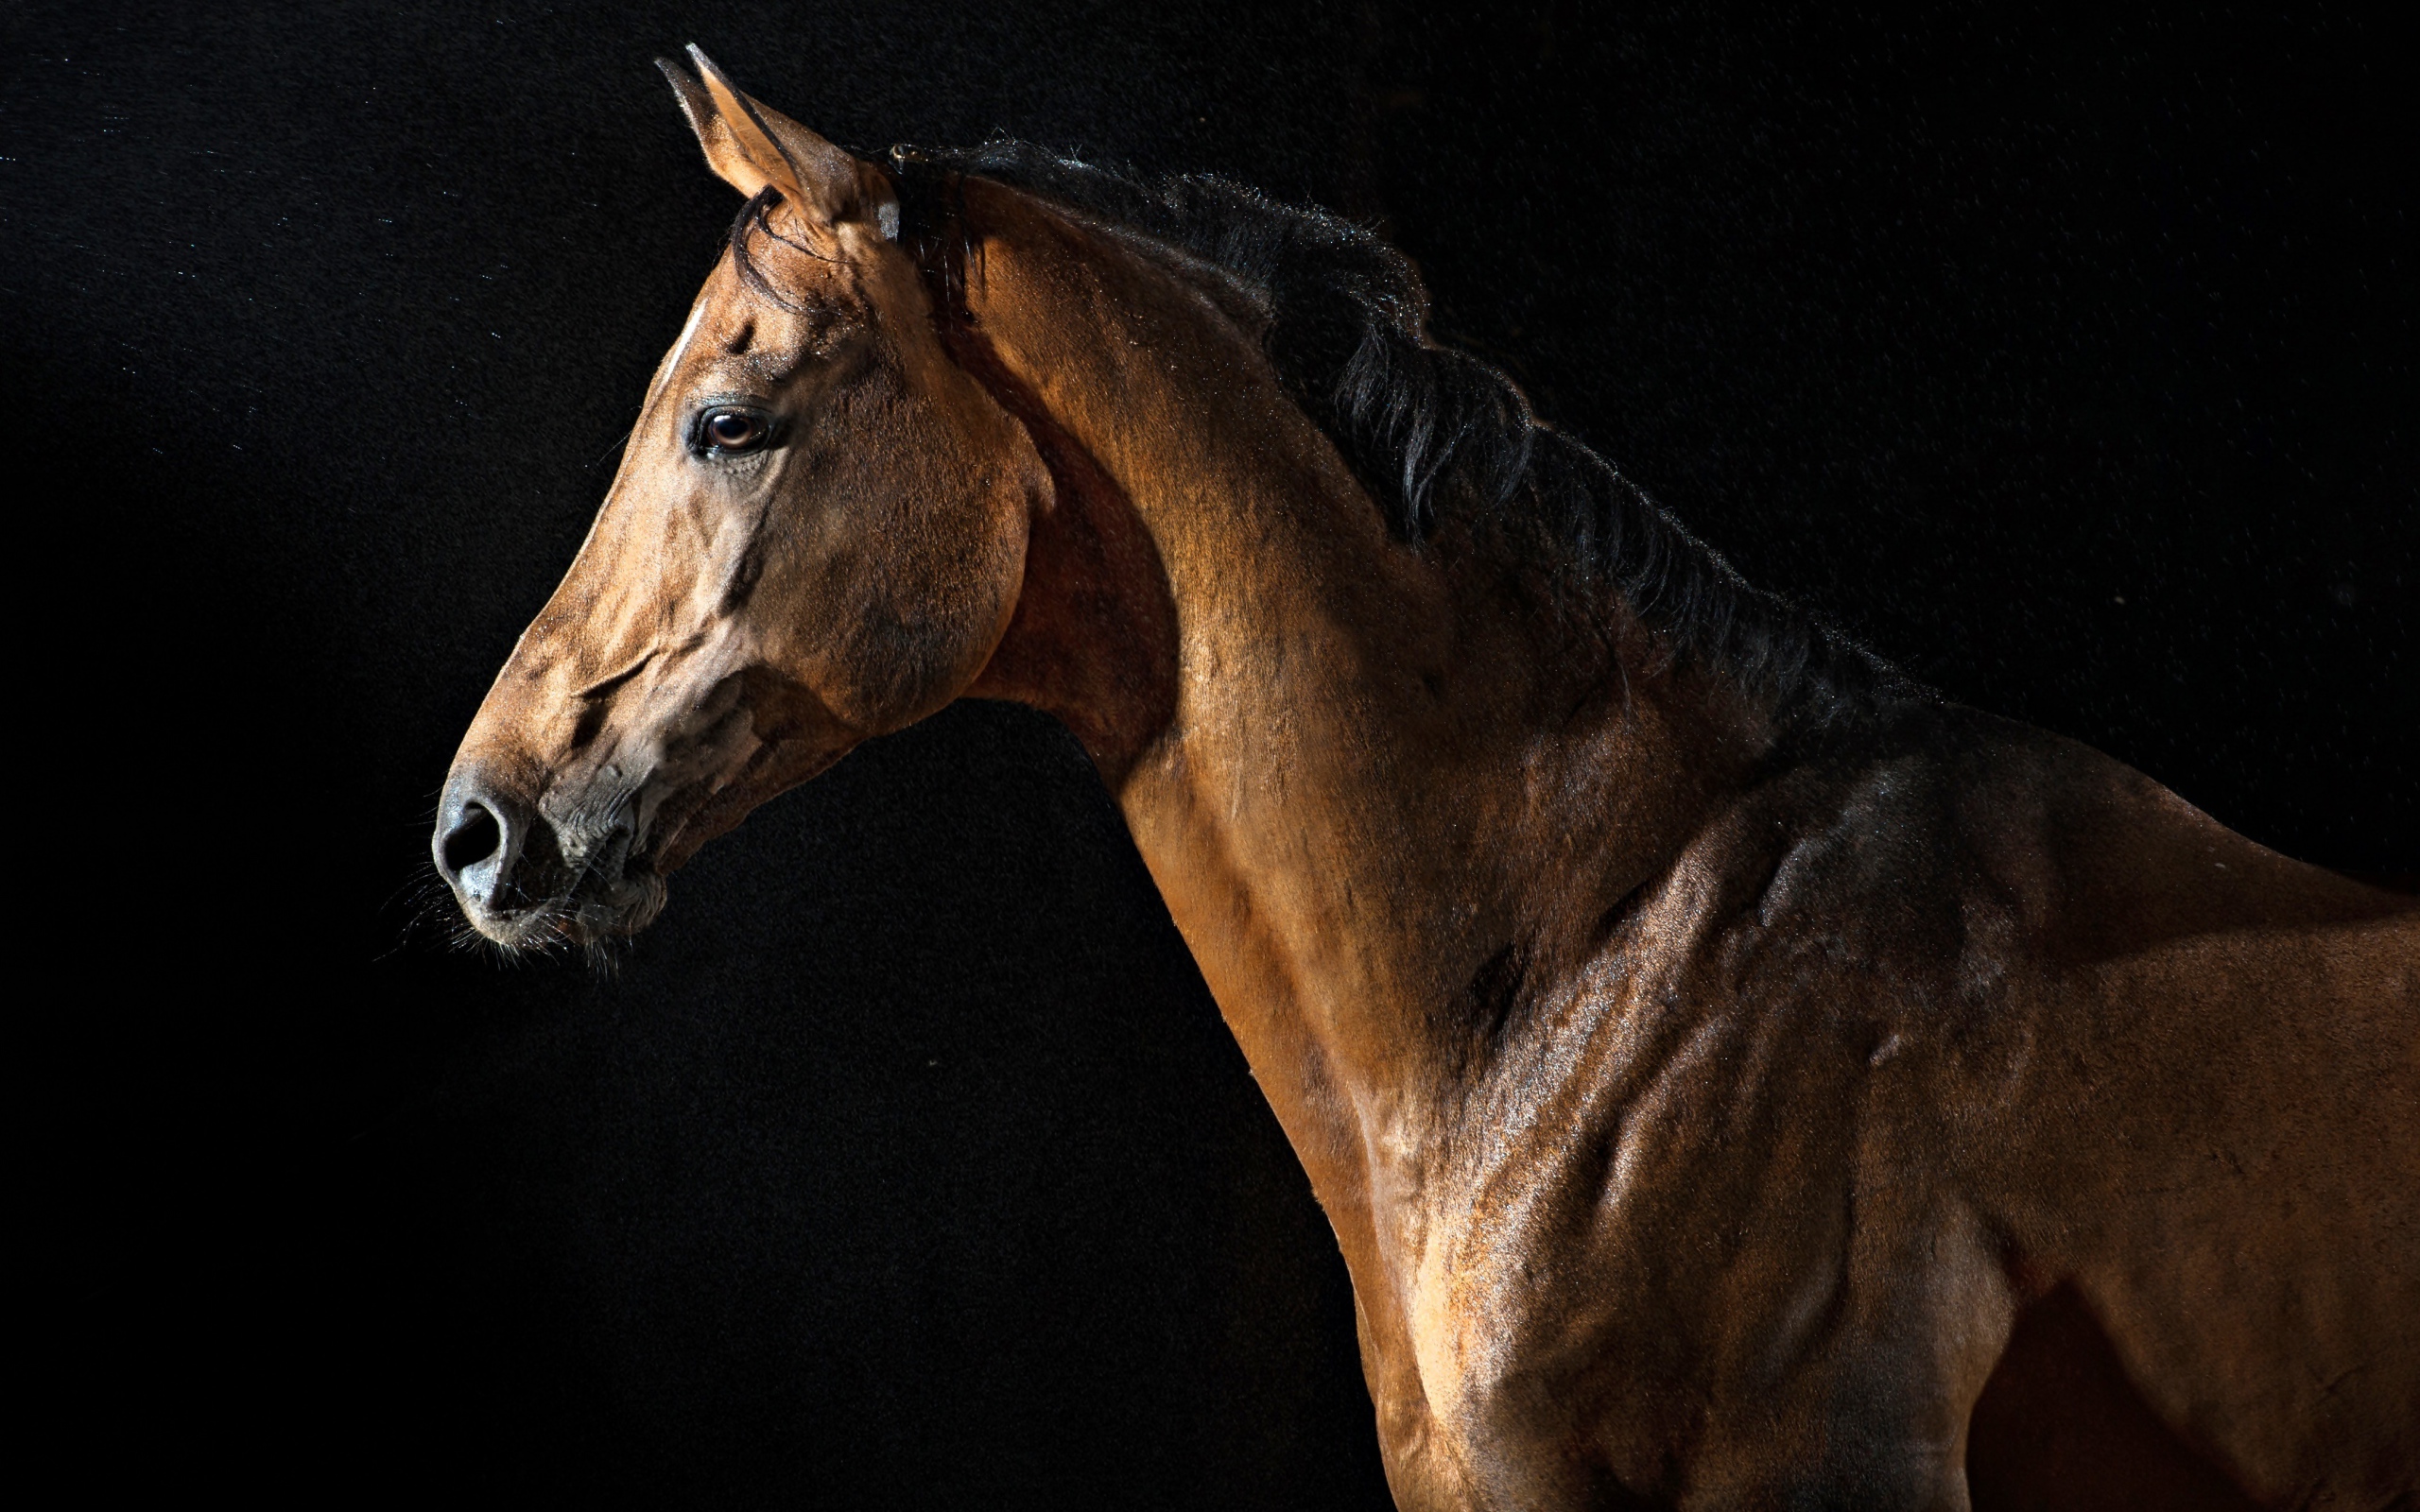 Big brown horse on a black background